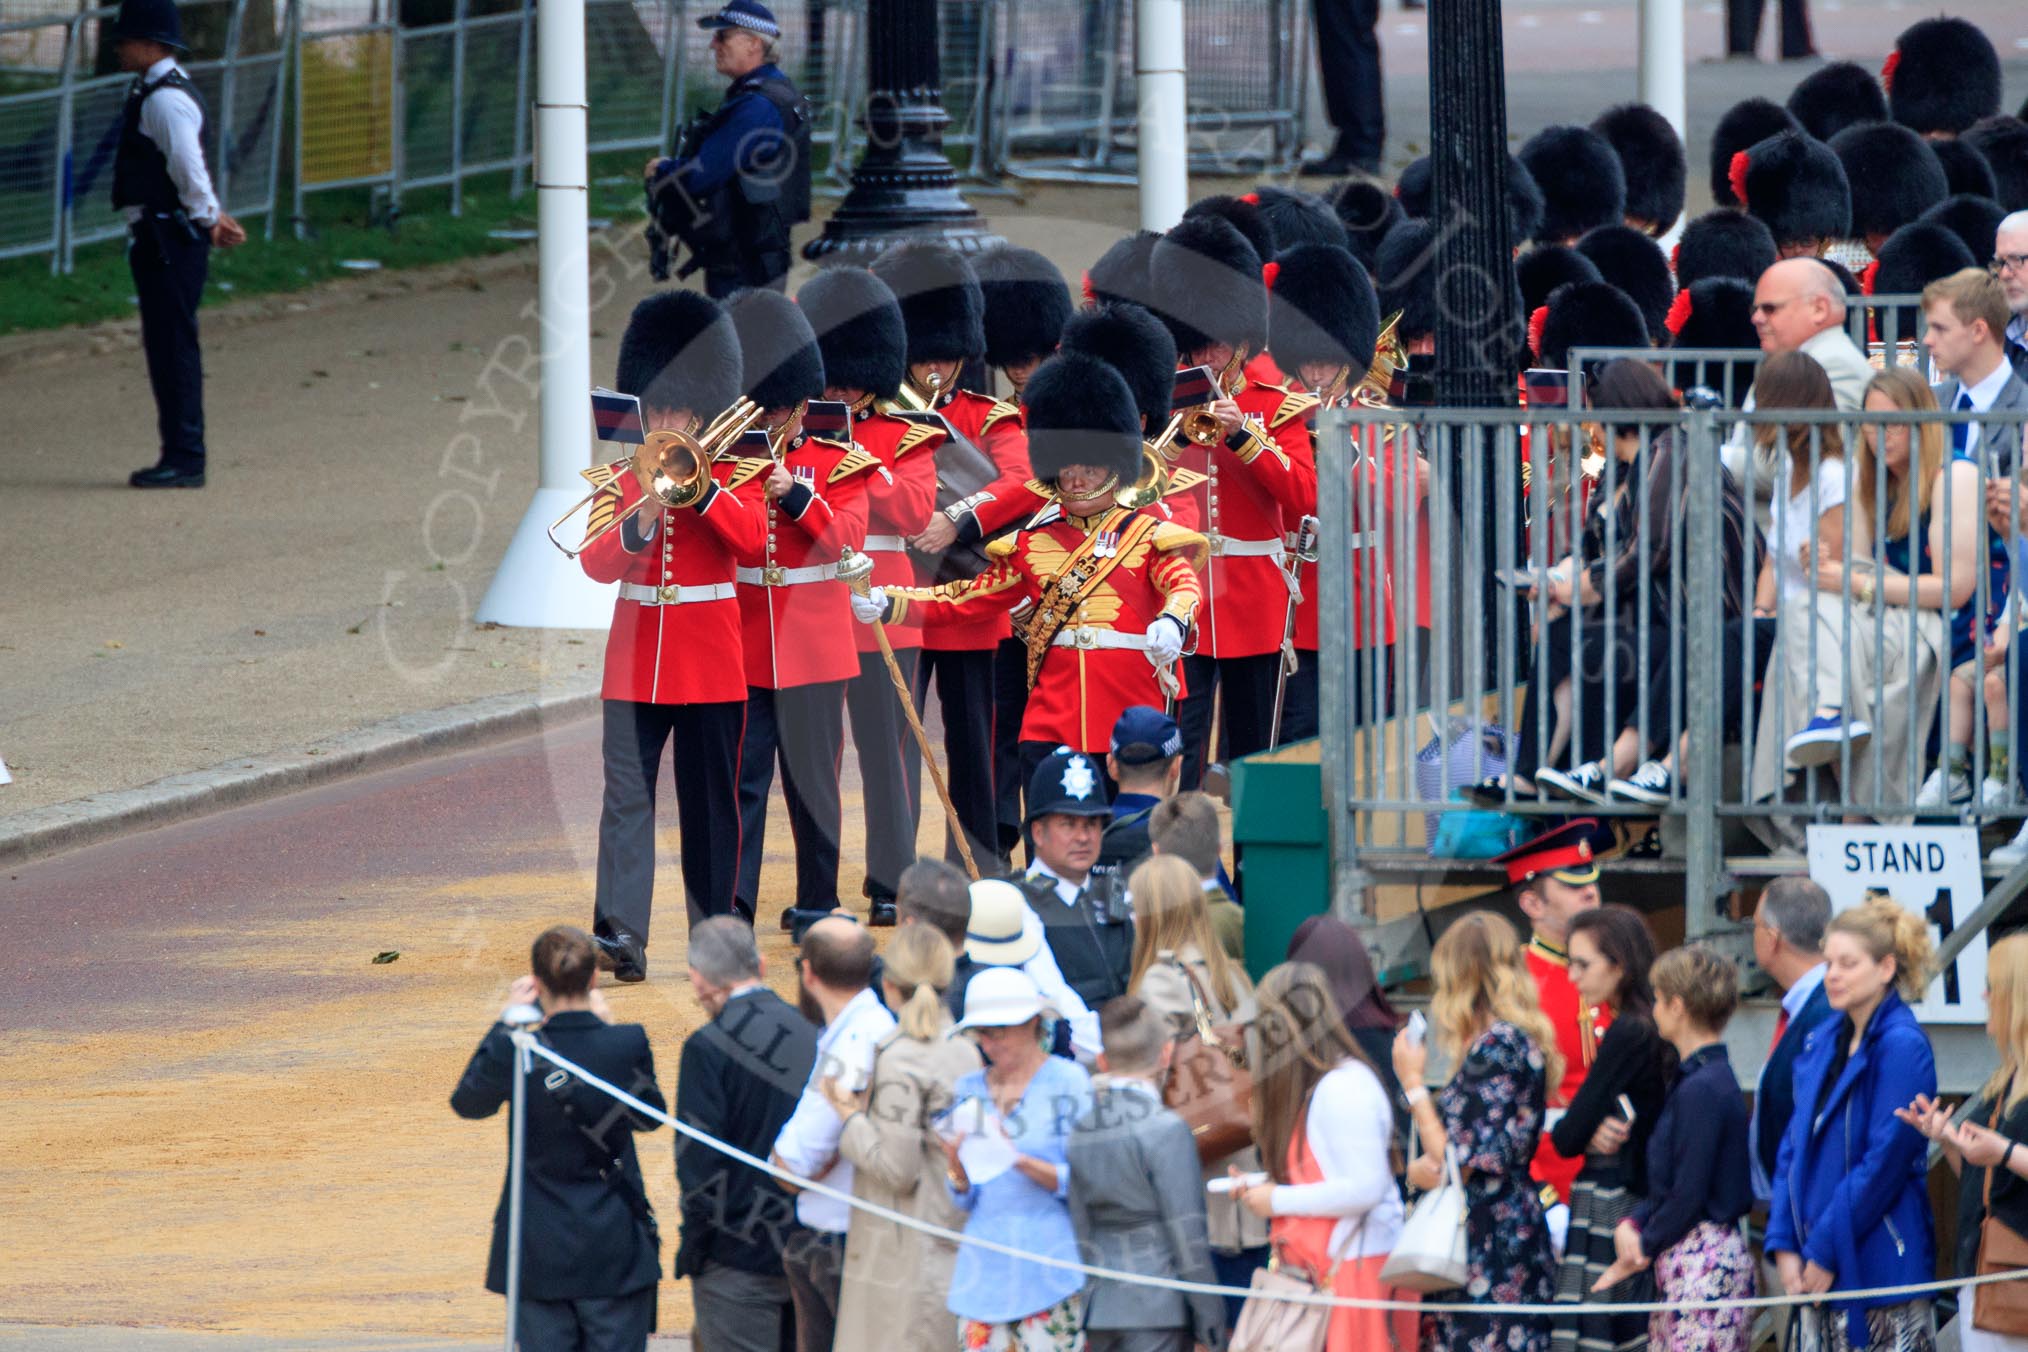 during The Colonel's Review {iptcyear4} (final rehearsal for Trooping the Colour, The Queen's Birthday Parade)  at Horse Guards Parade, Westminster, London, 2 June 2018, 10:30.